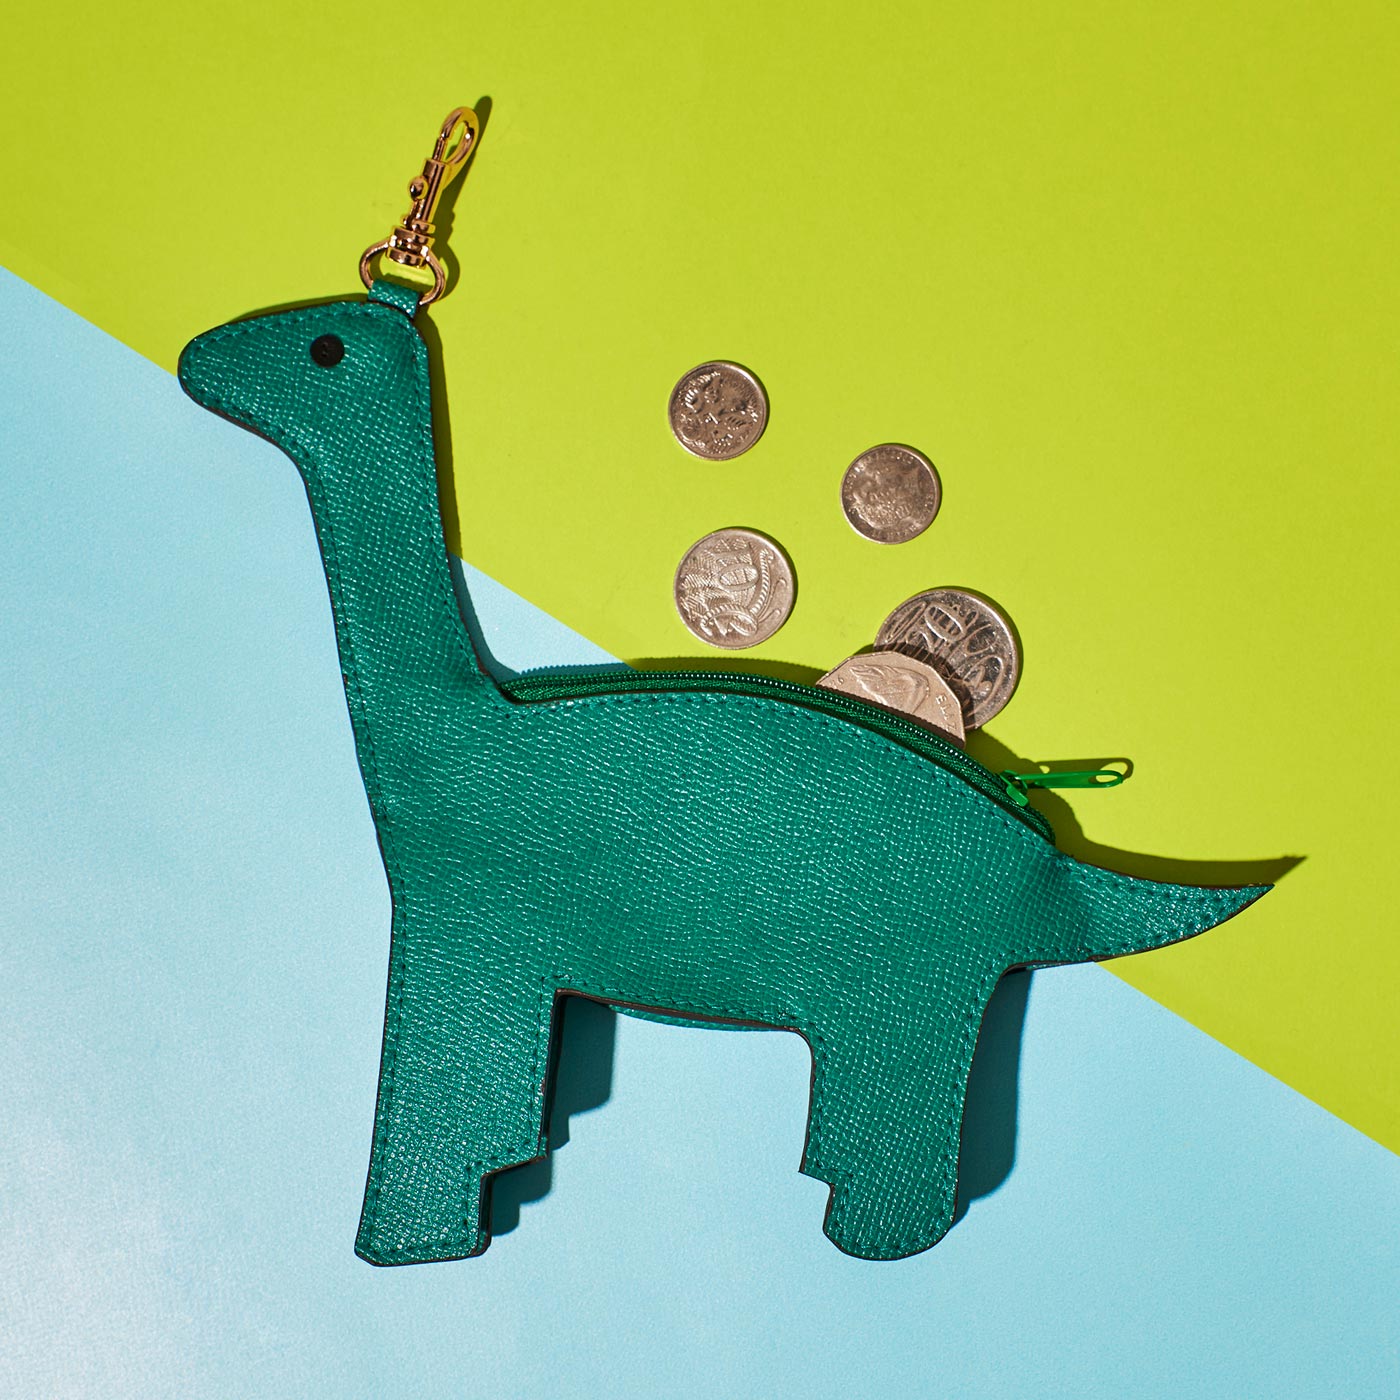 Wicker Darling's Branwell the brontosaurus coin purse on a colourful background